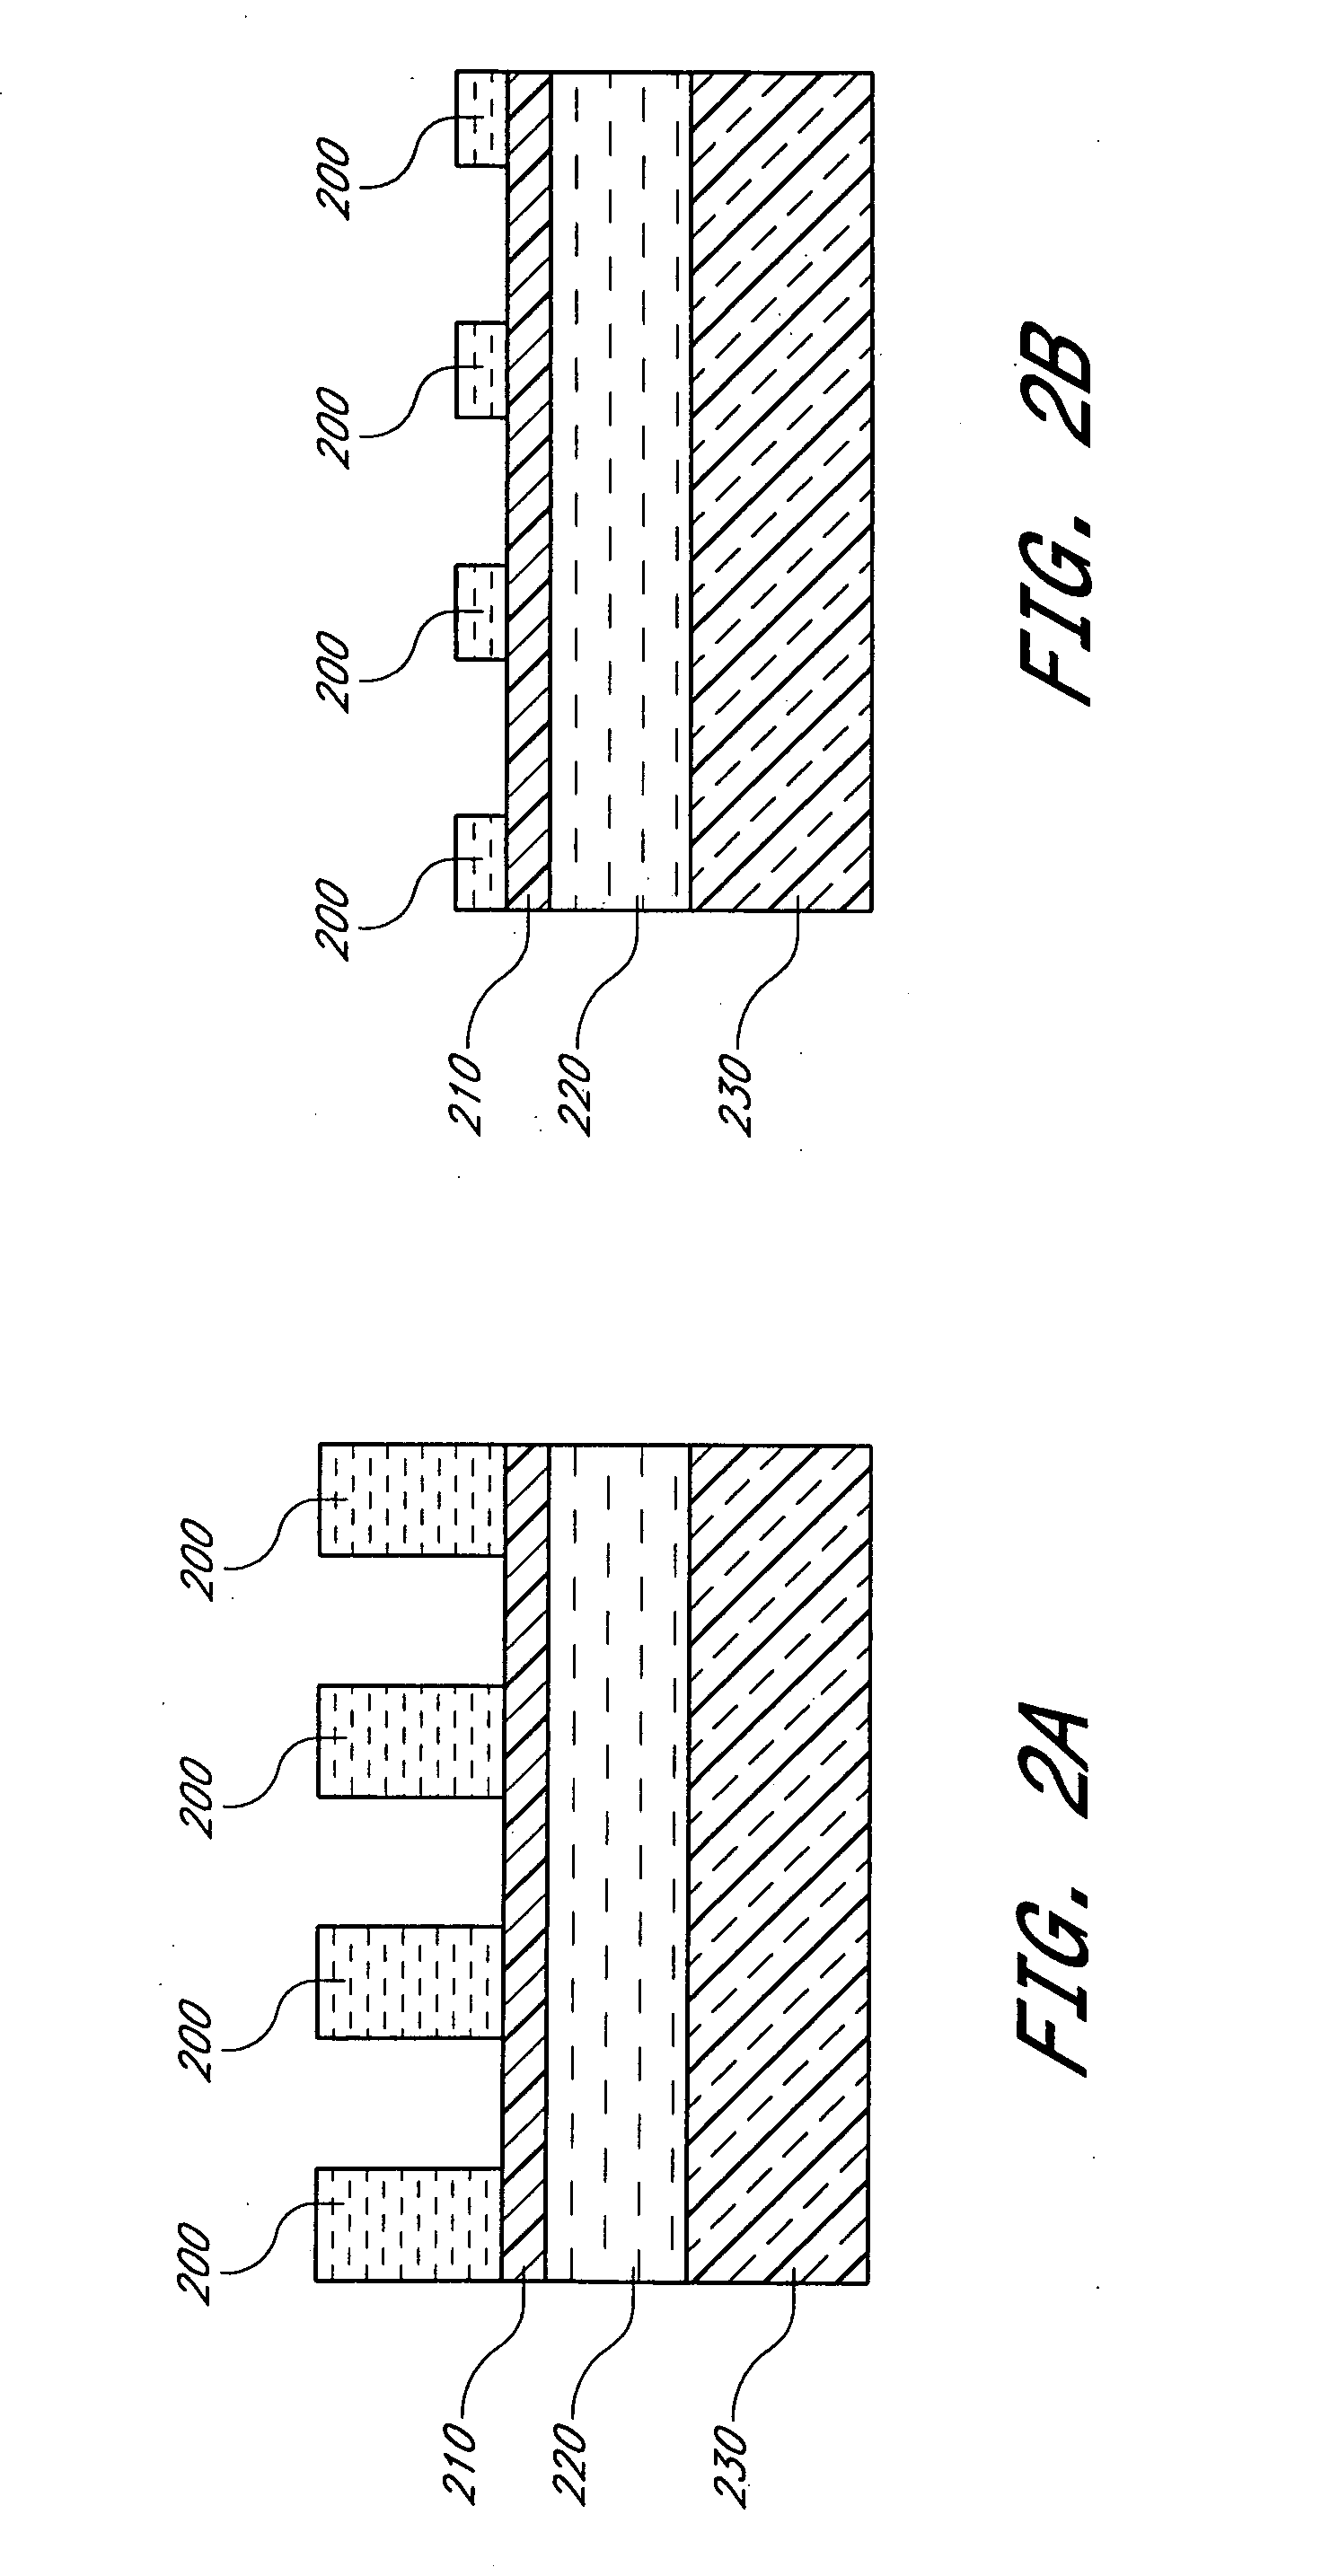 Critical dimension control for integrated circuits